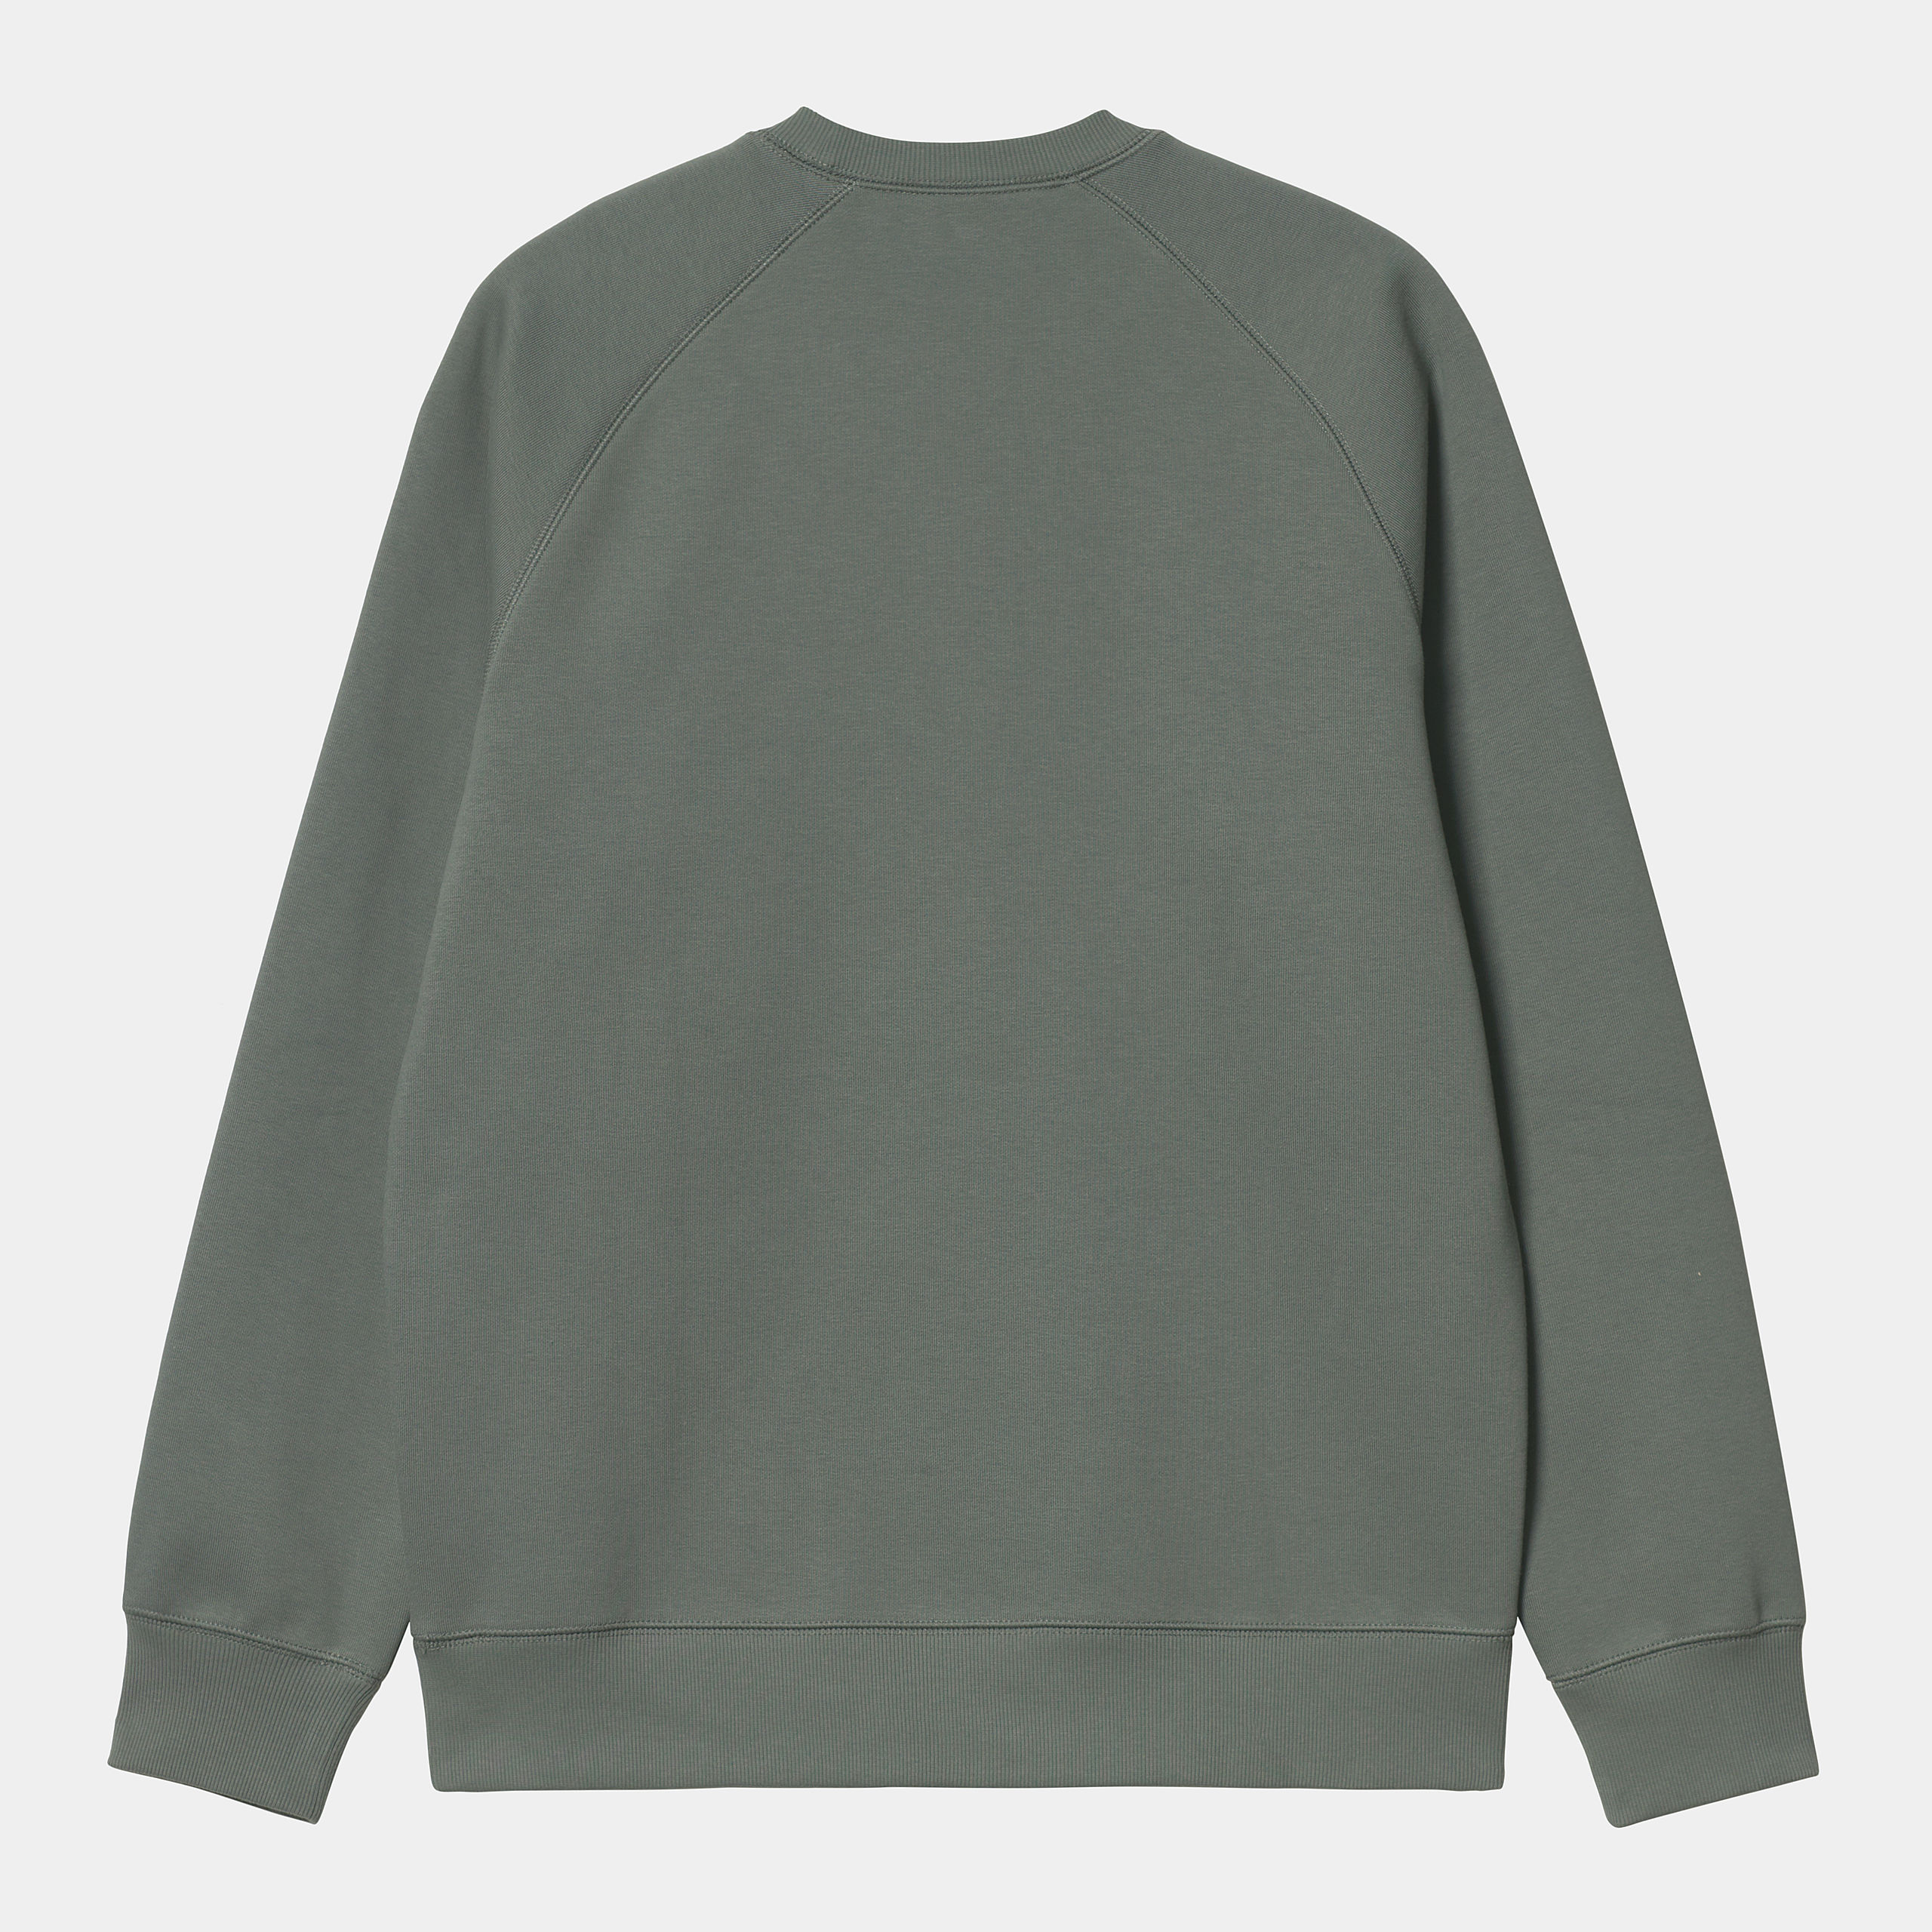 Carhartt WIP - CHASE SWEAT - Thyme/Gold